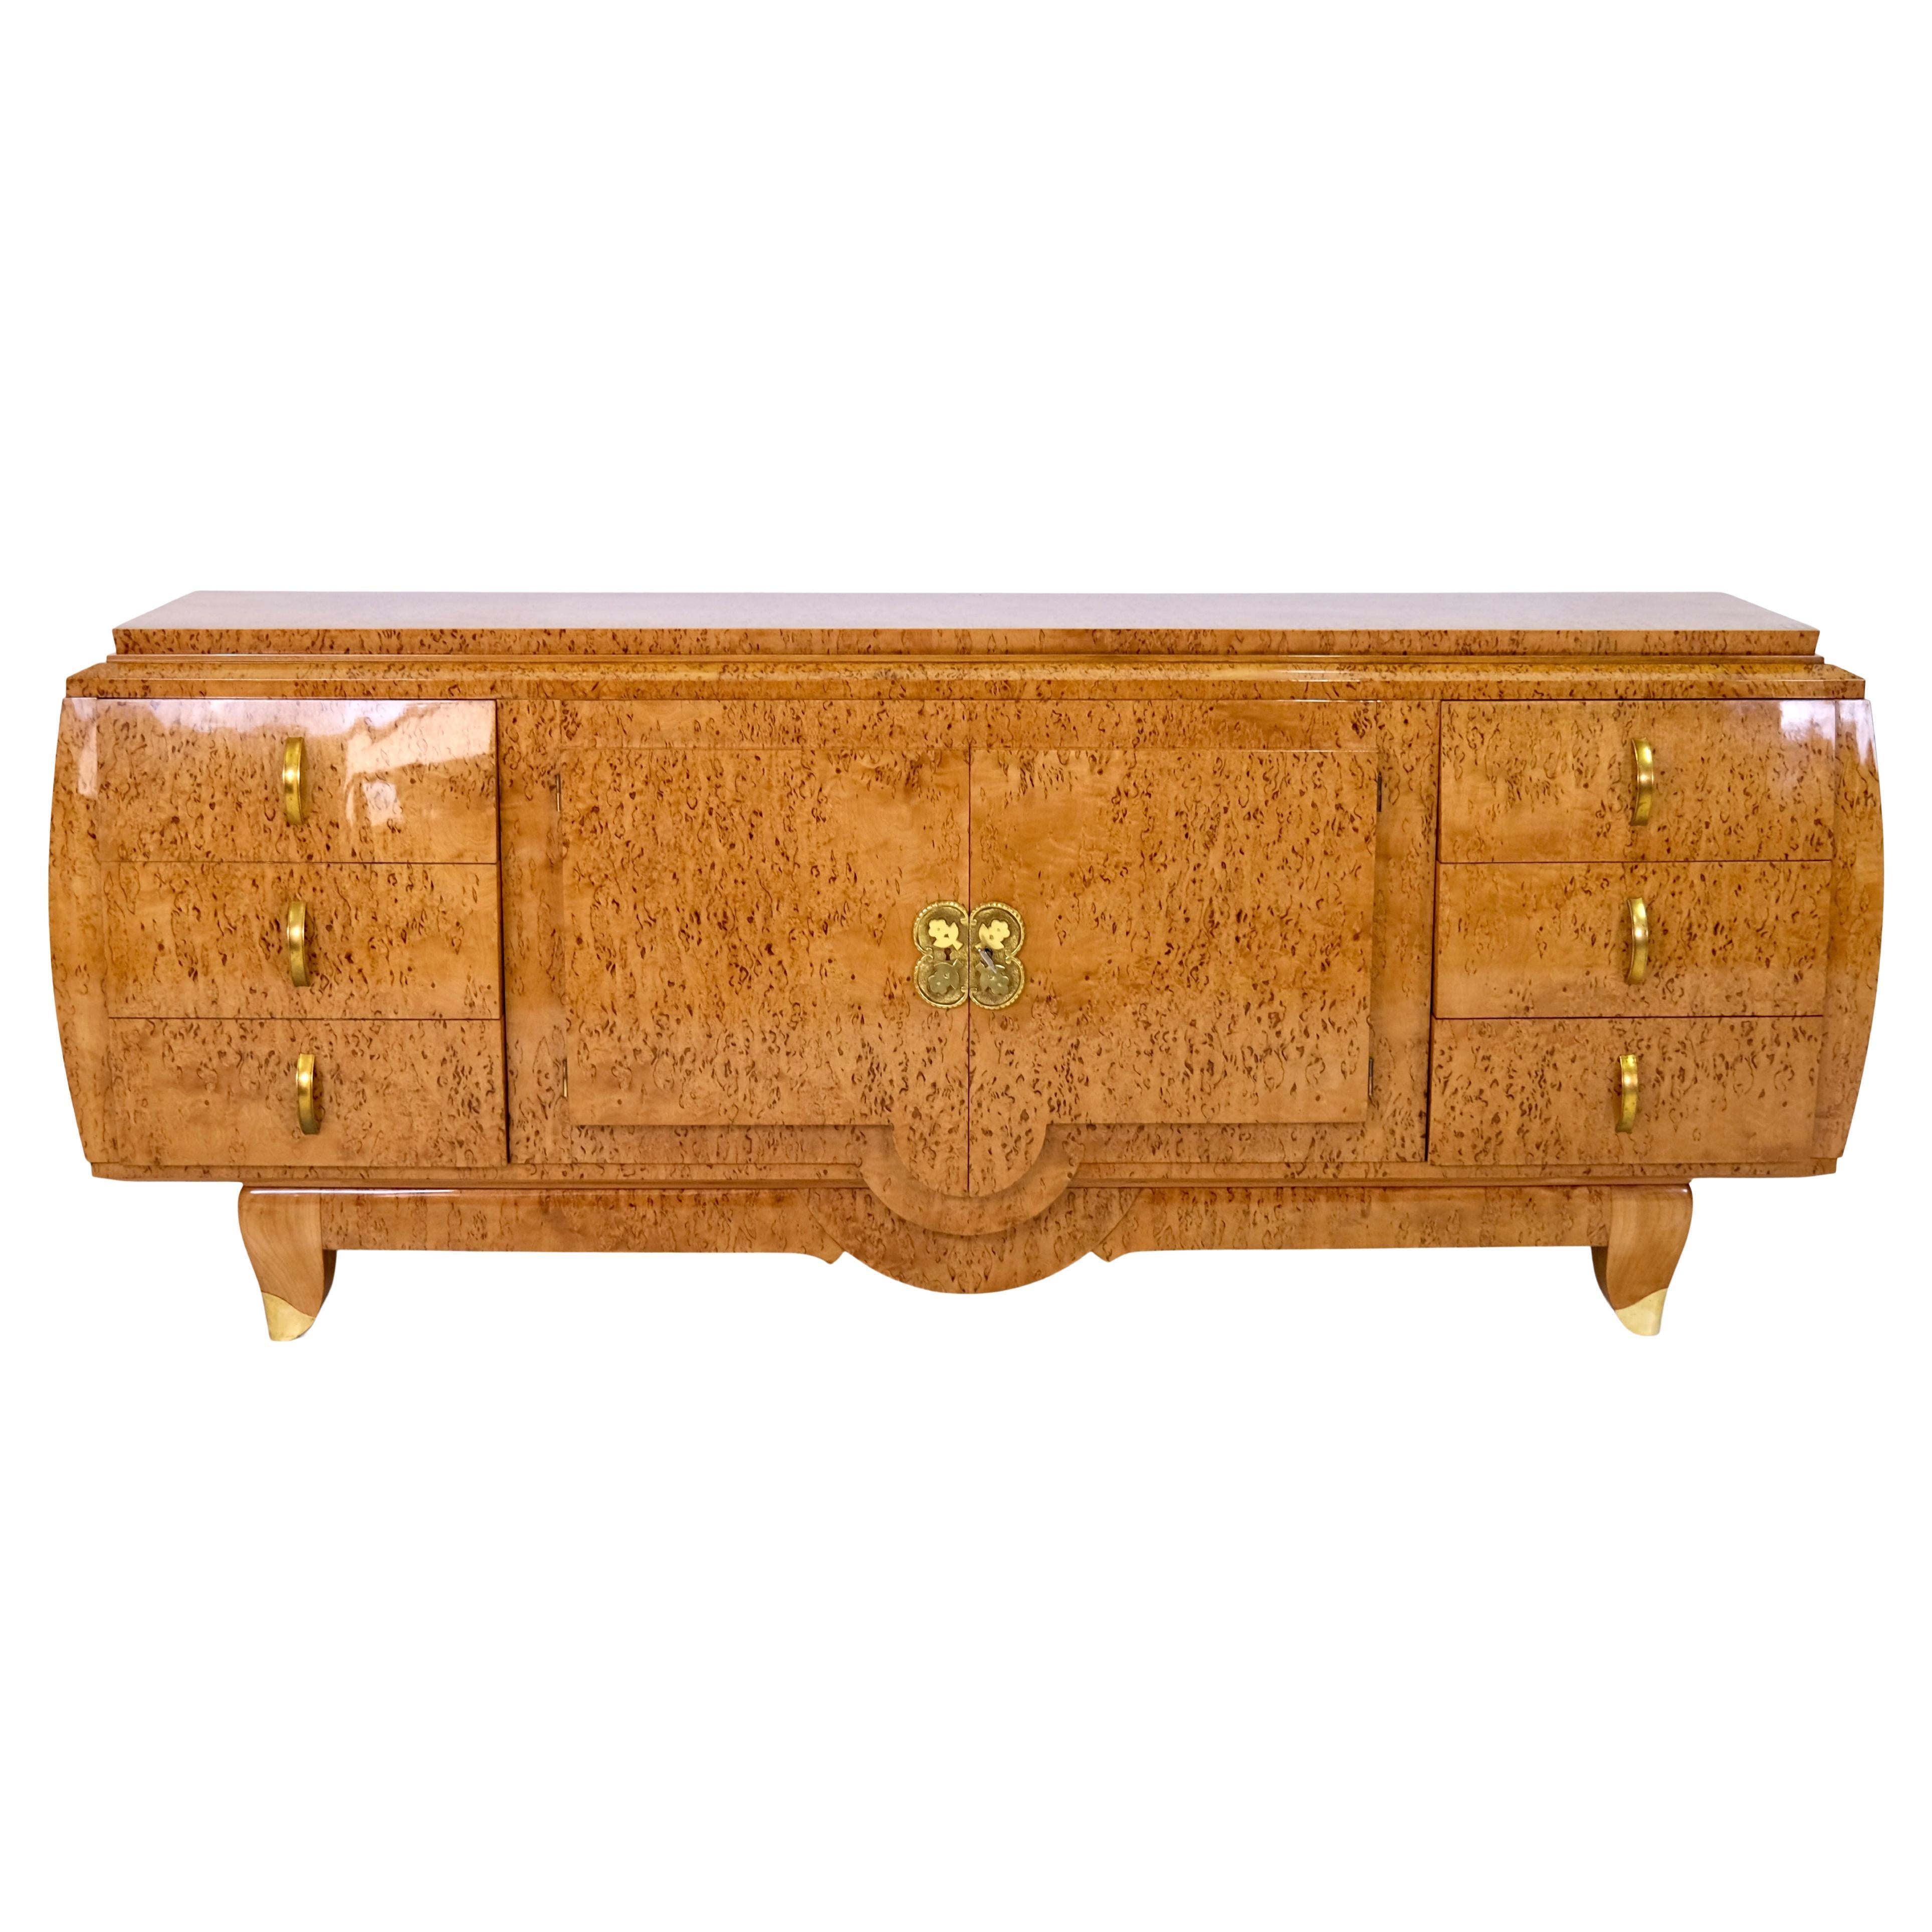 Curved hand polished Art Deco Sideboard in Birch Burl Wood with Brass Fittings